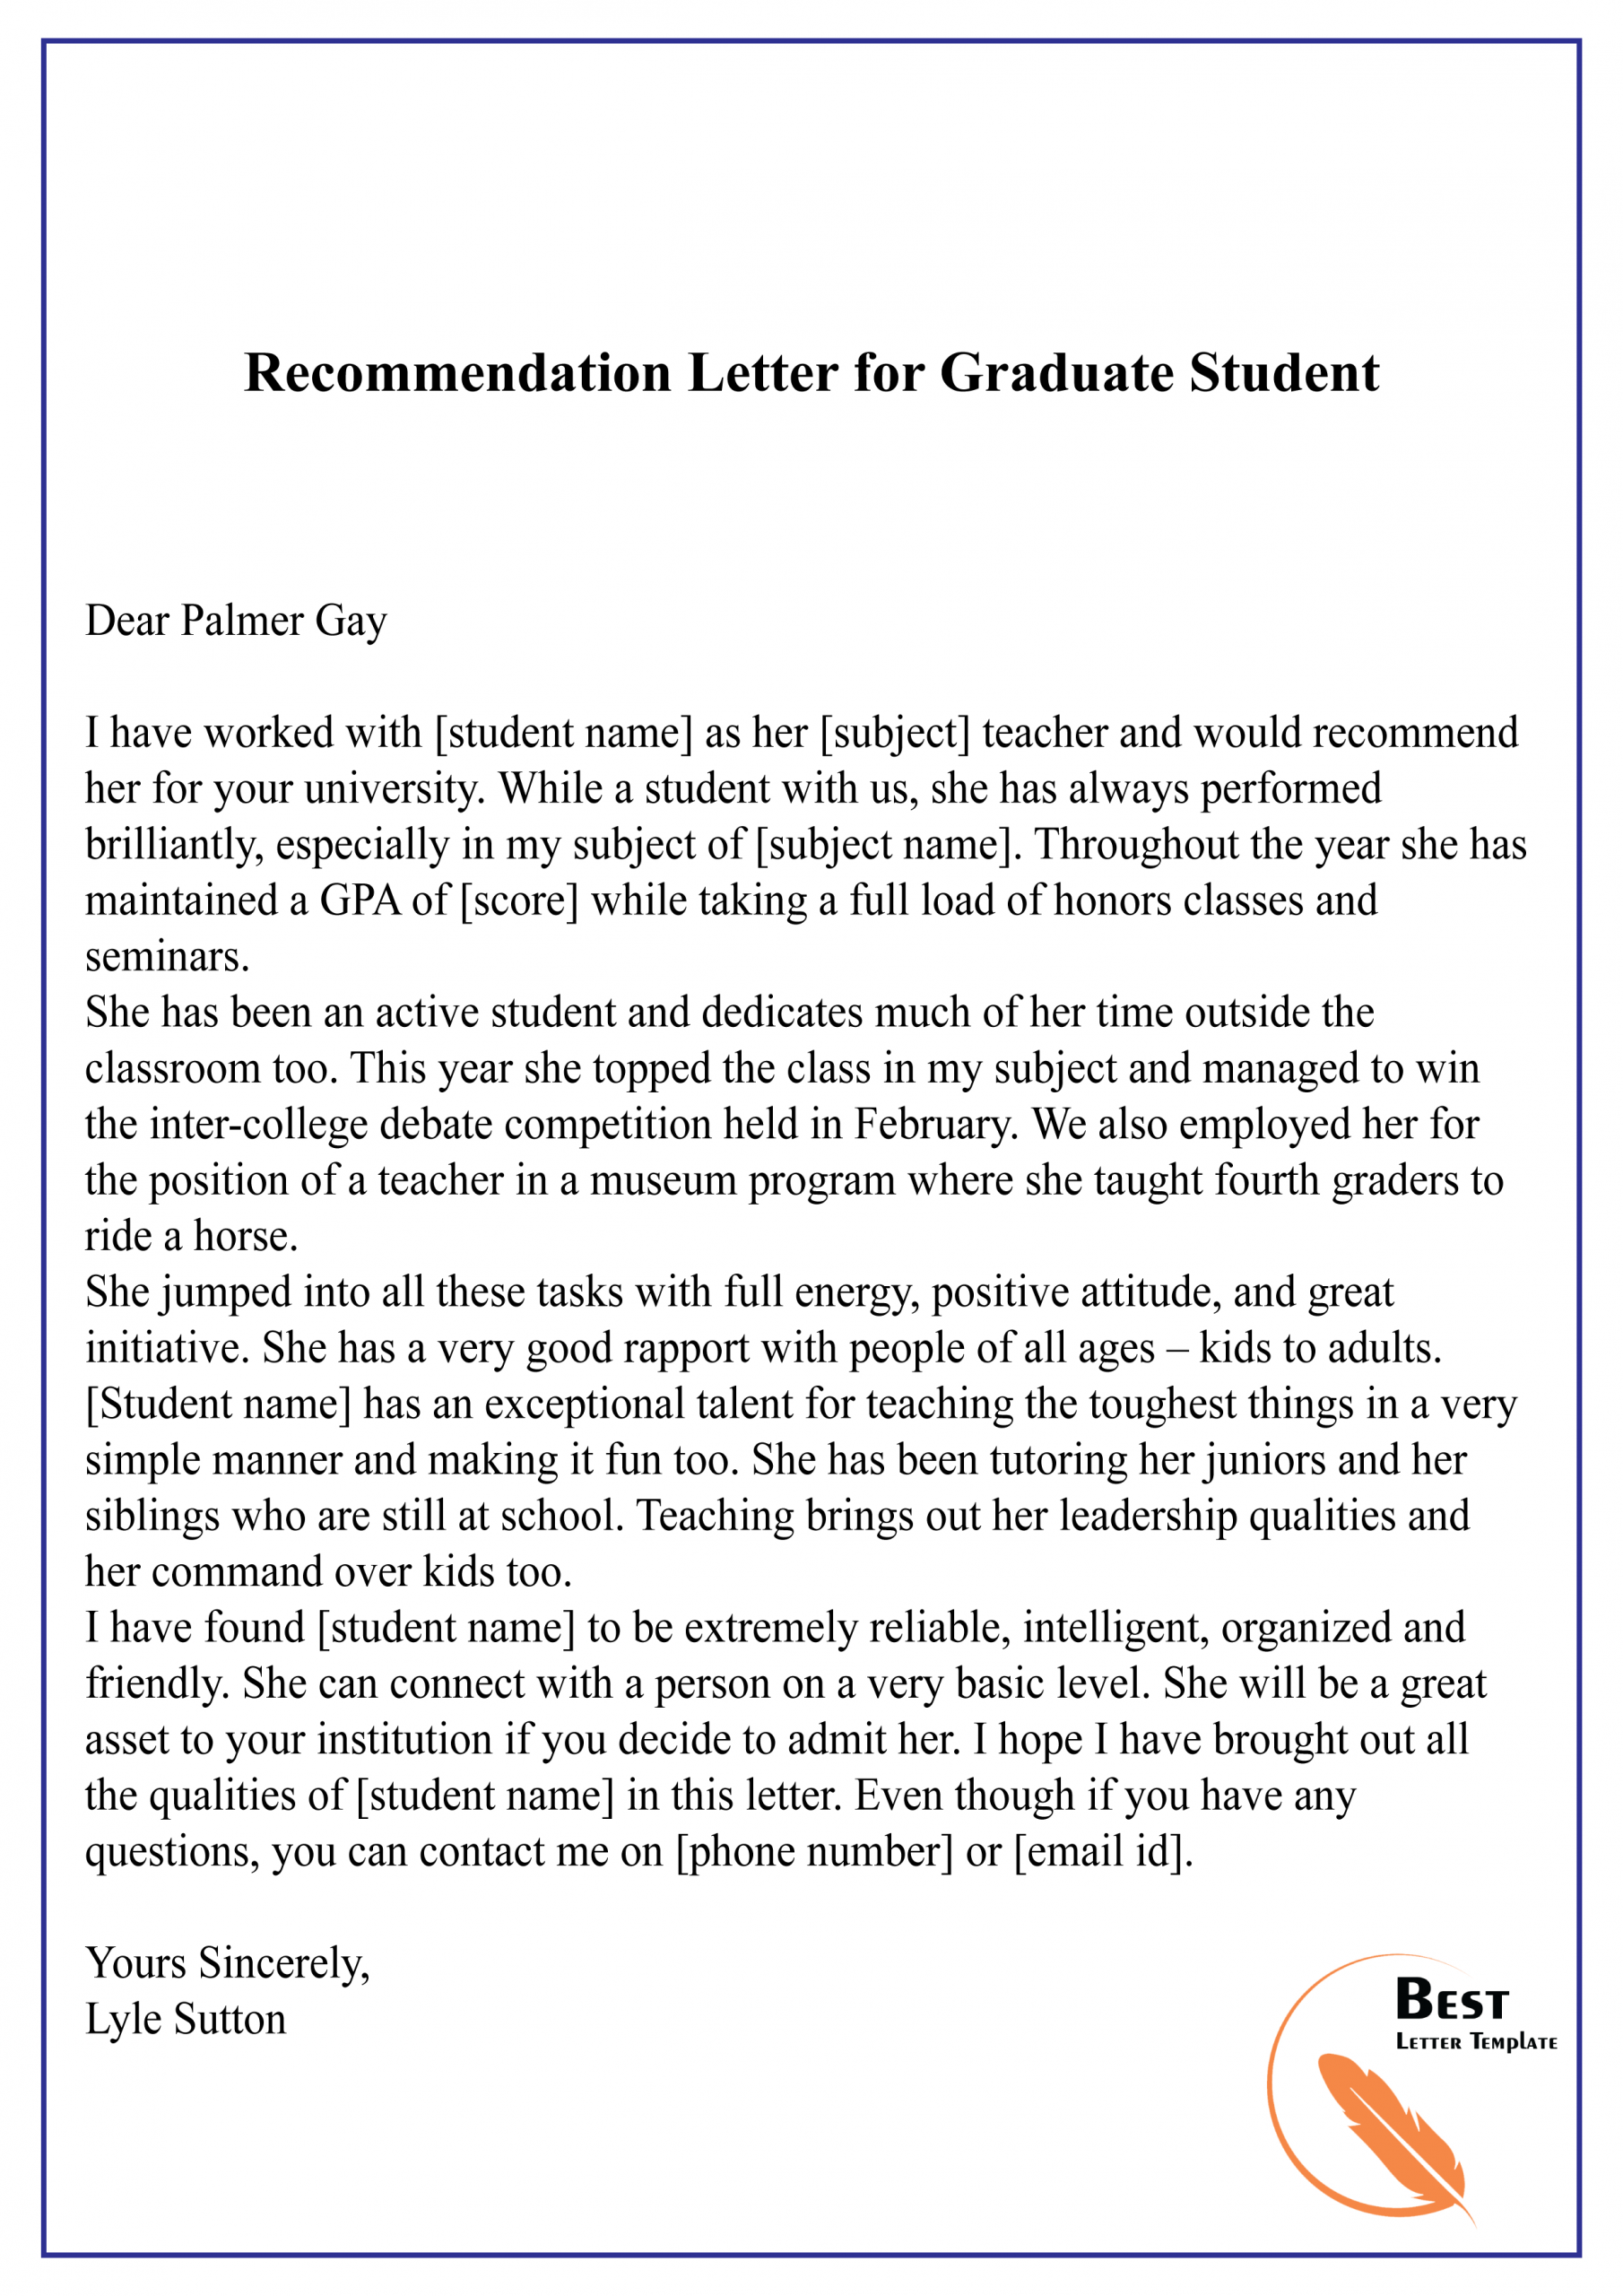 Recommendation Letter For Graduate Student 01 Best Letter intended for measurements 2480 X 3508